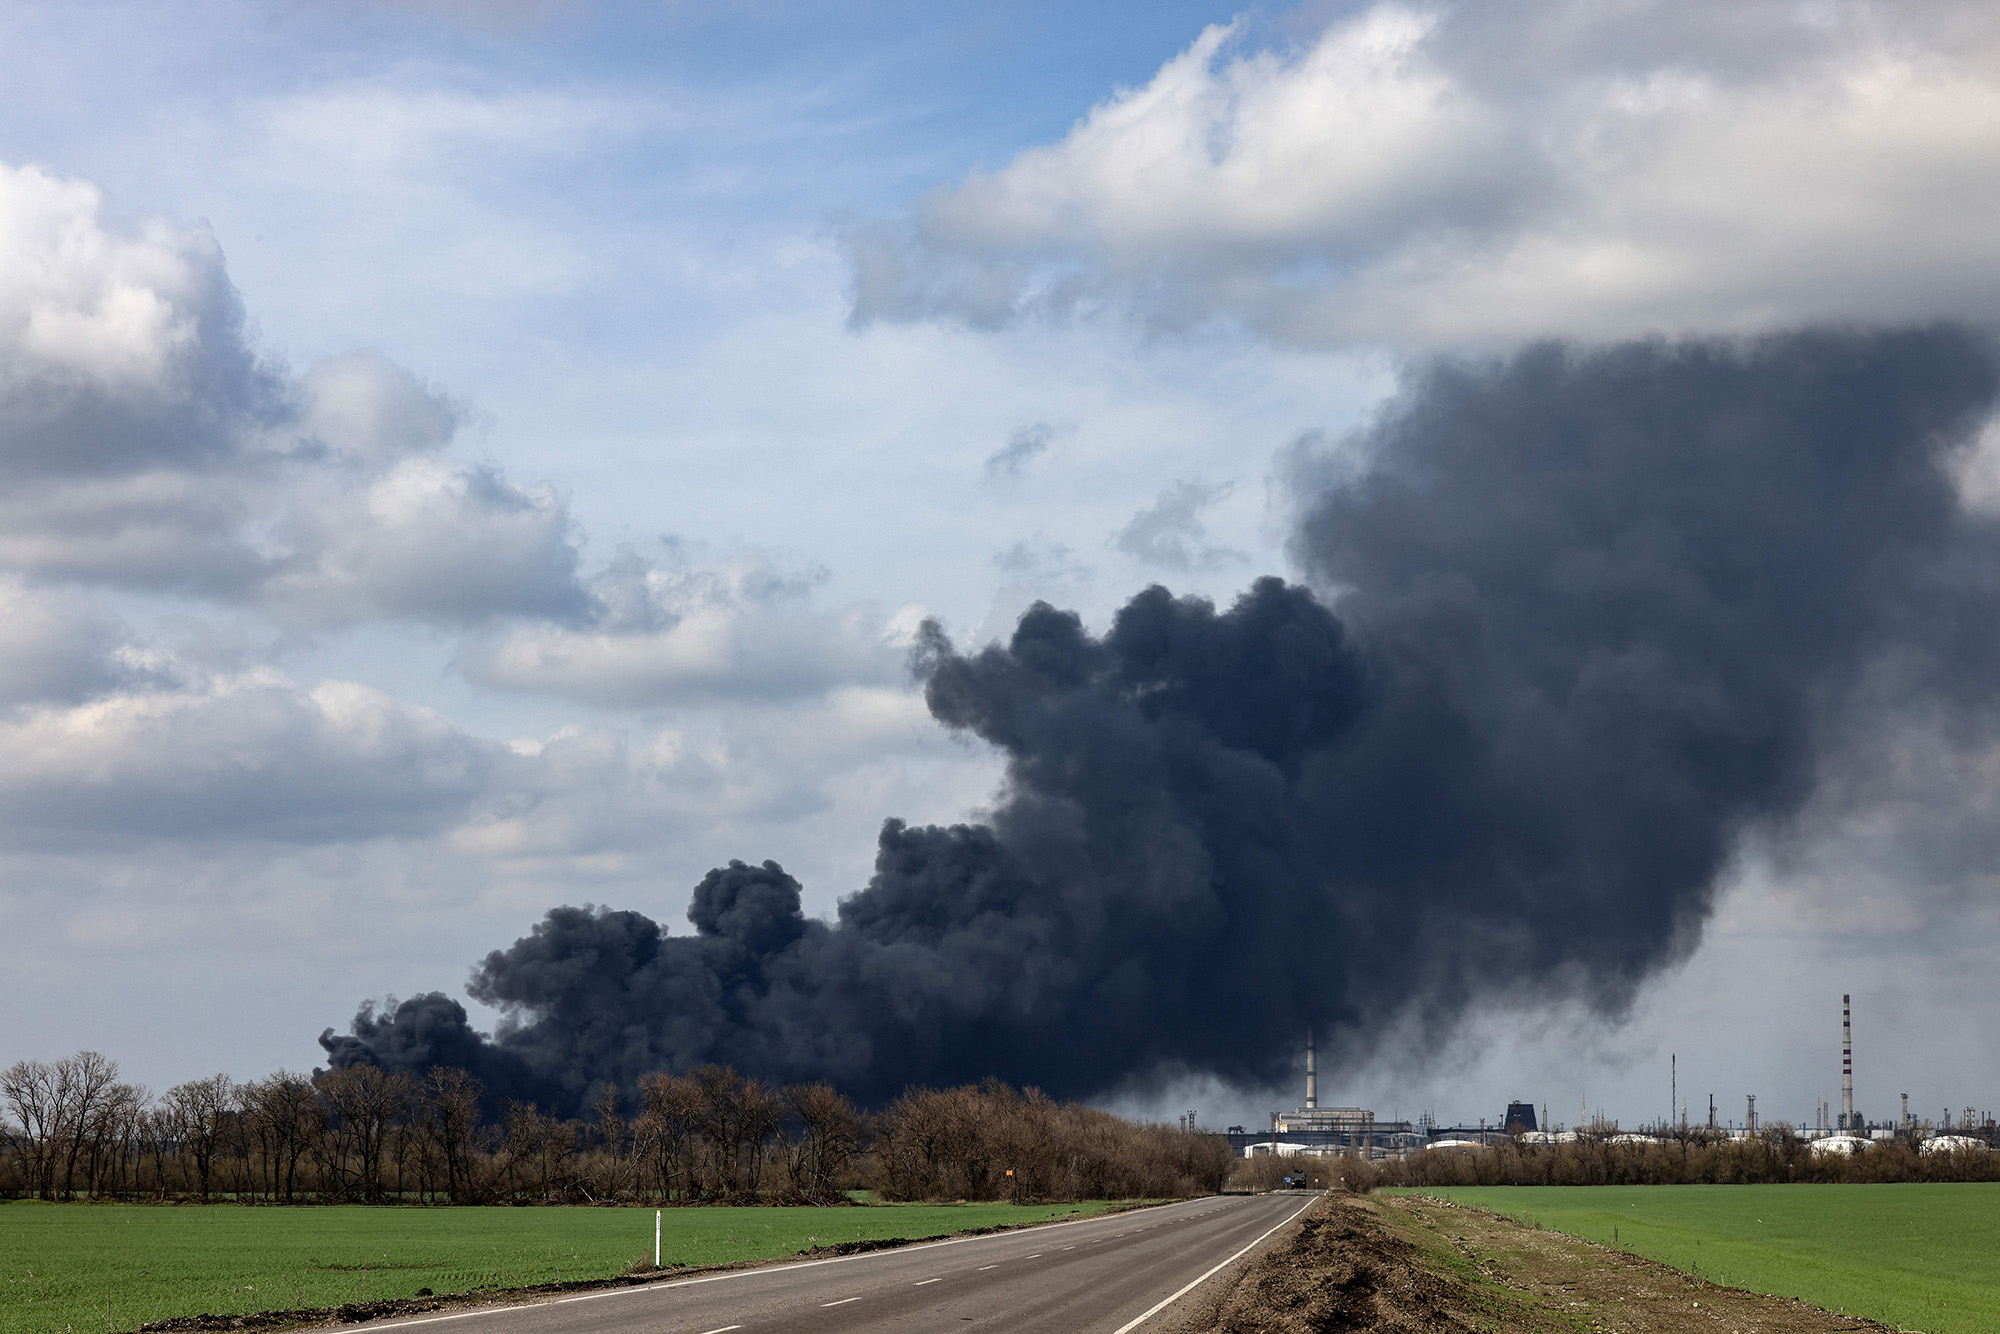 Smoke raises from an oil refinery in Lysychansk about 120km north of Donetsk, Ukraine, on April 16.